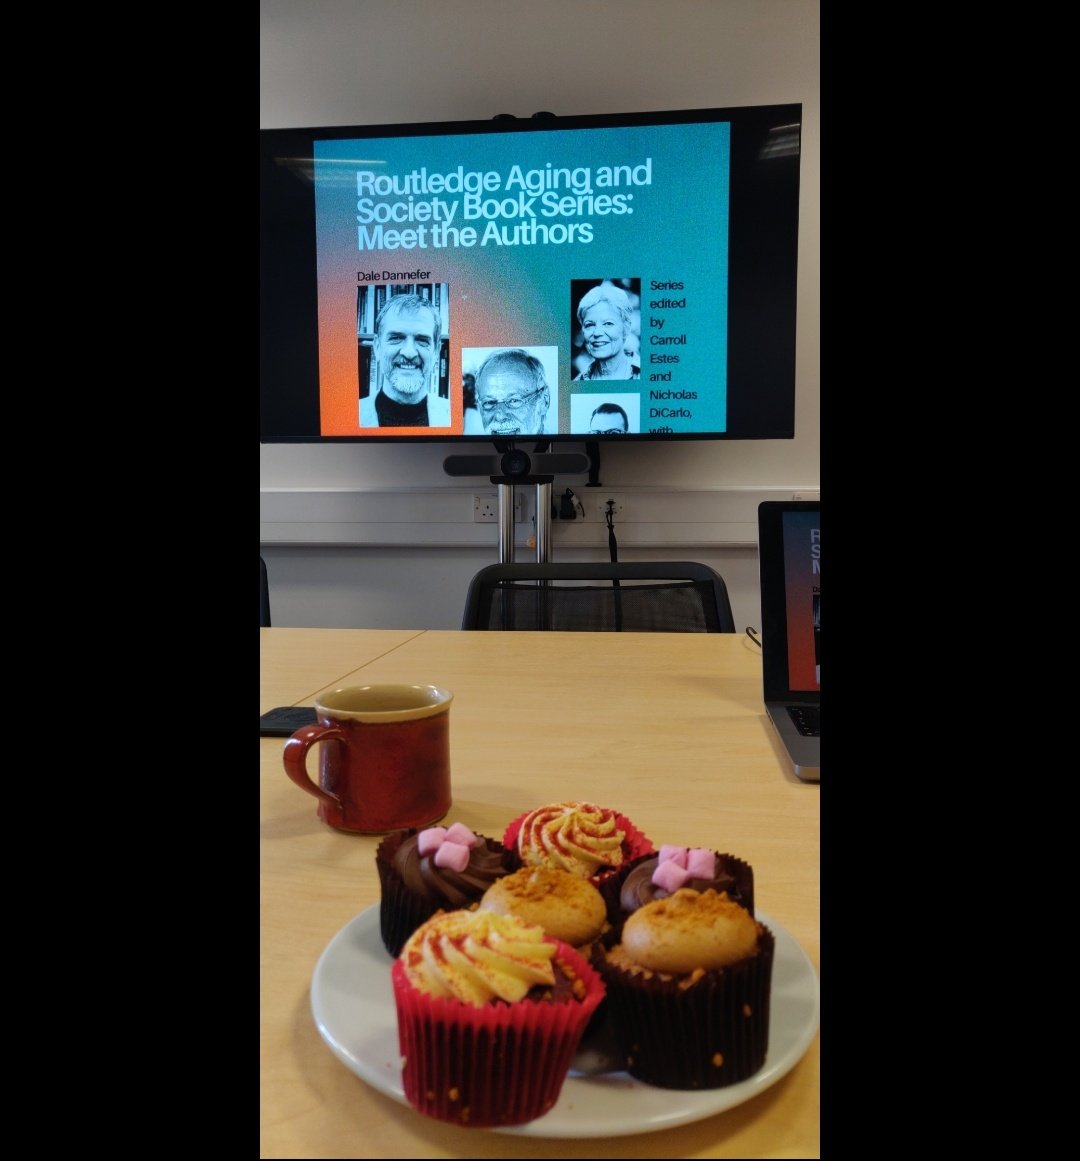 Coffee and cake at the ready for the Routledge Aging and Society book series launch. Featuring new book 'Ageing in Urban Environments' by @BuffelTine and Chris Phillipson. @EmancipatoryLab @LeverhulmeTrust @uomsoss